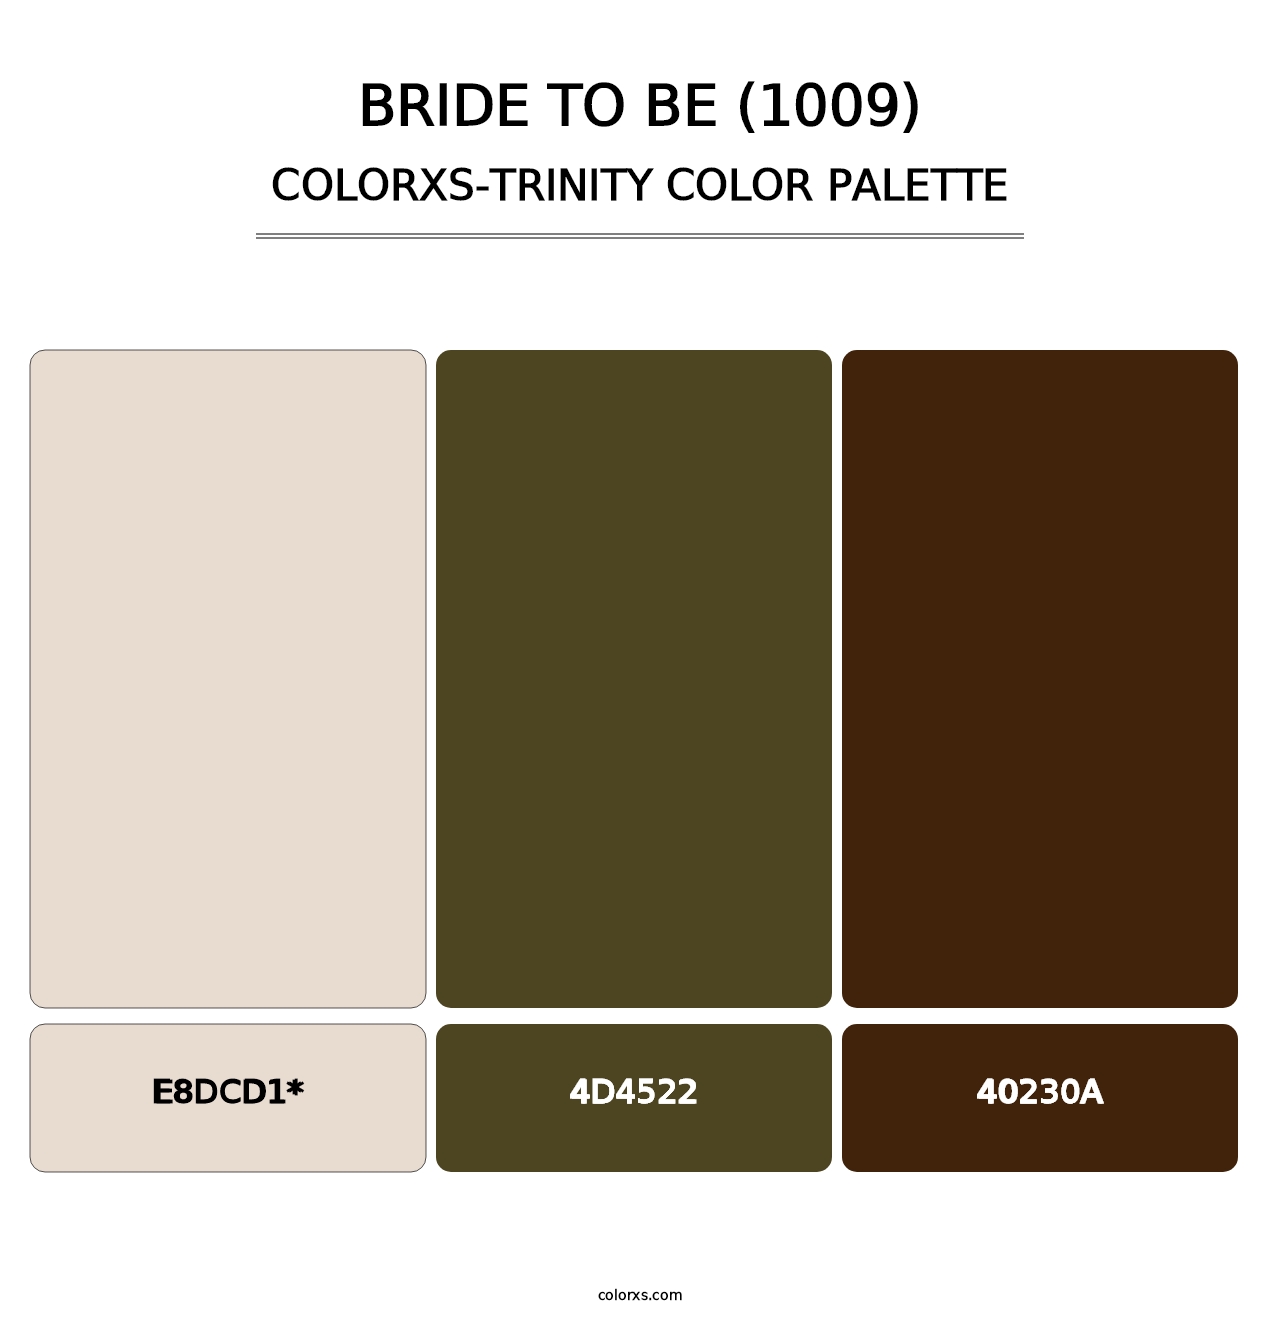 Bride To Be (1009) - Colorxs Trinity Palette